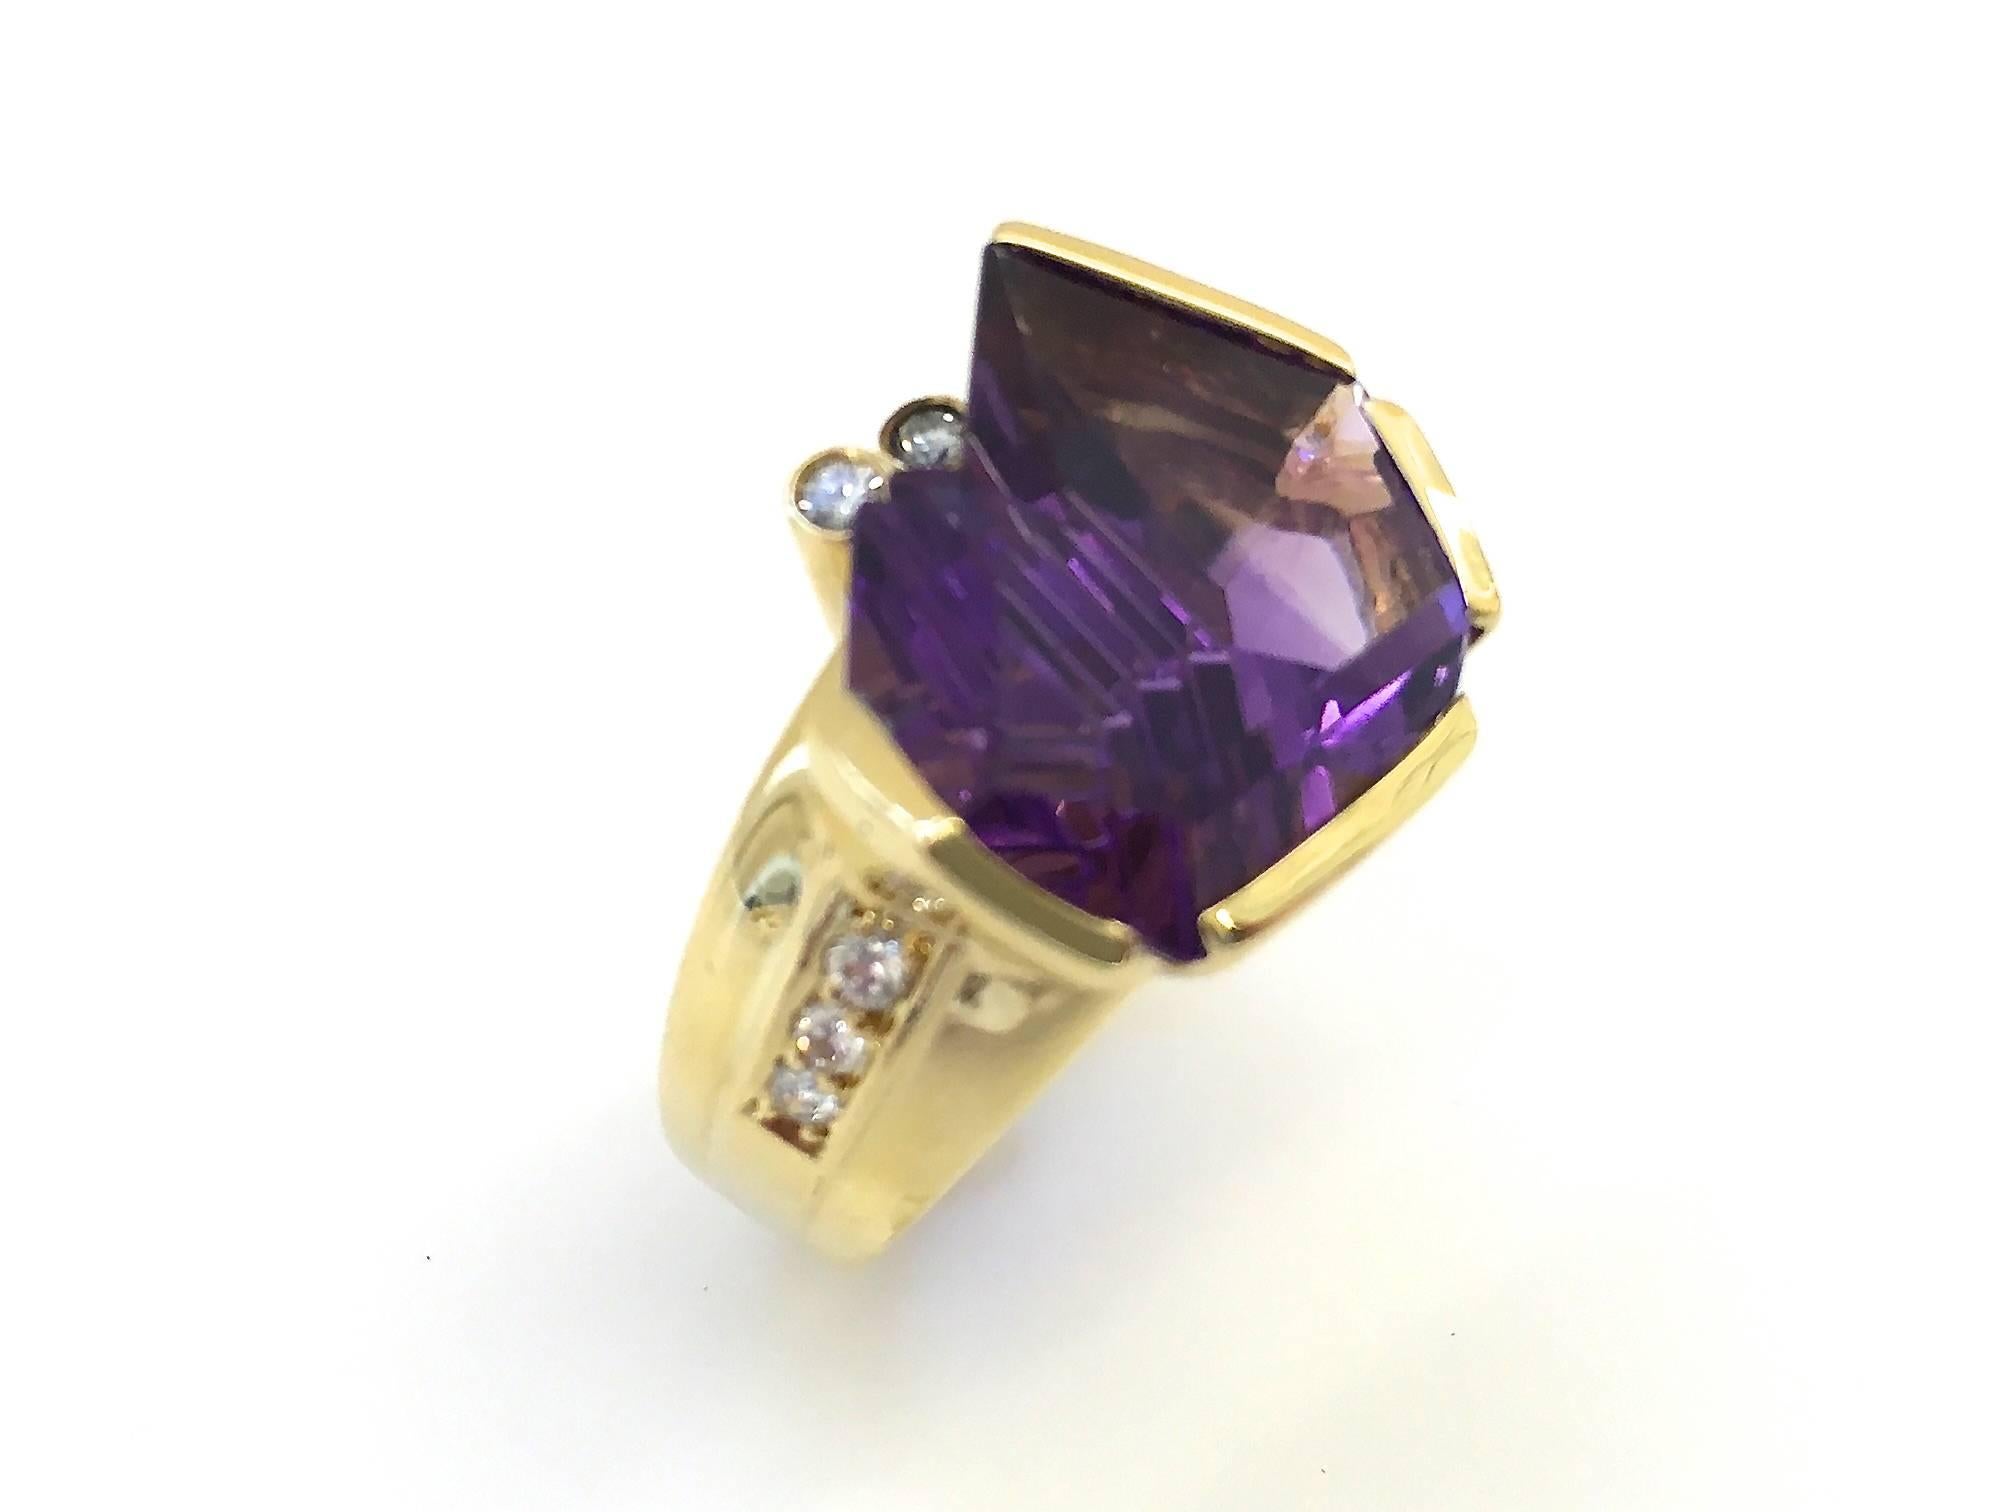 Munsteiner Amethyst for H.Stern. A handsome ring in 18k yellow gold. The 3/4